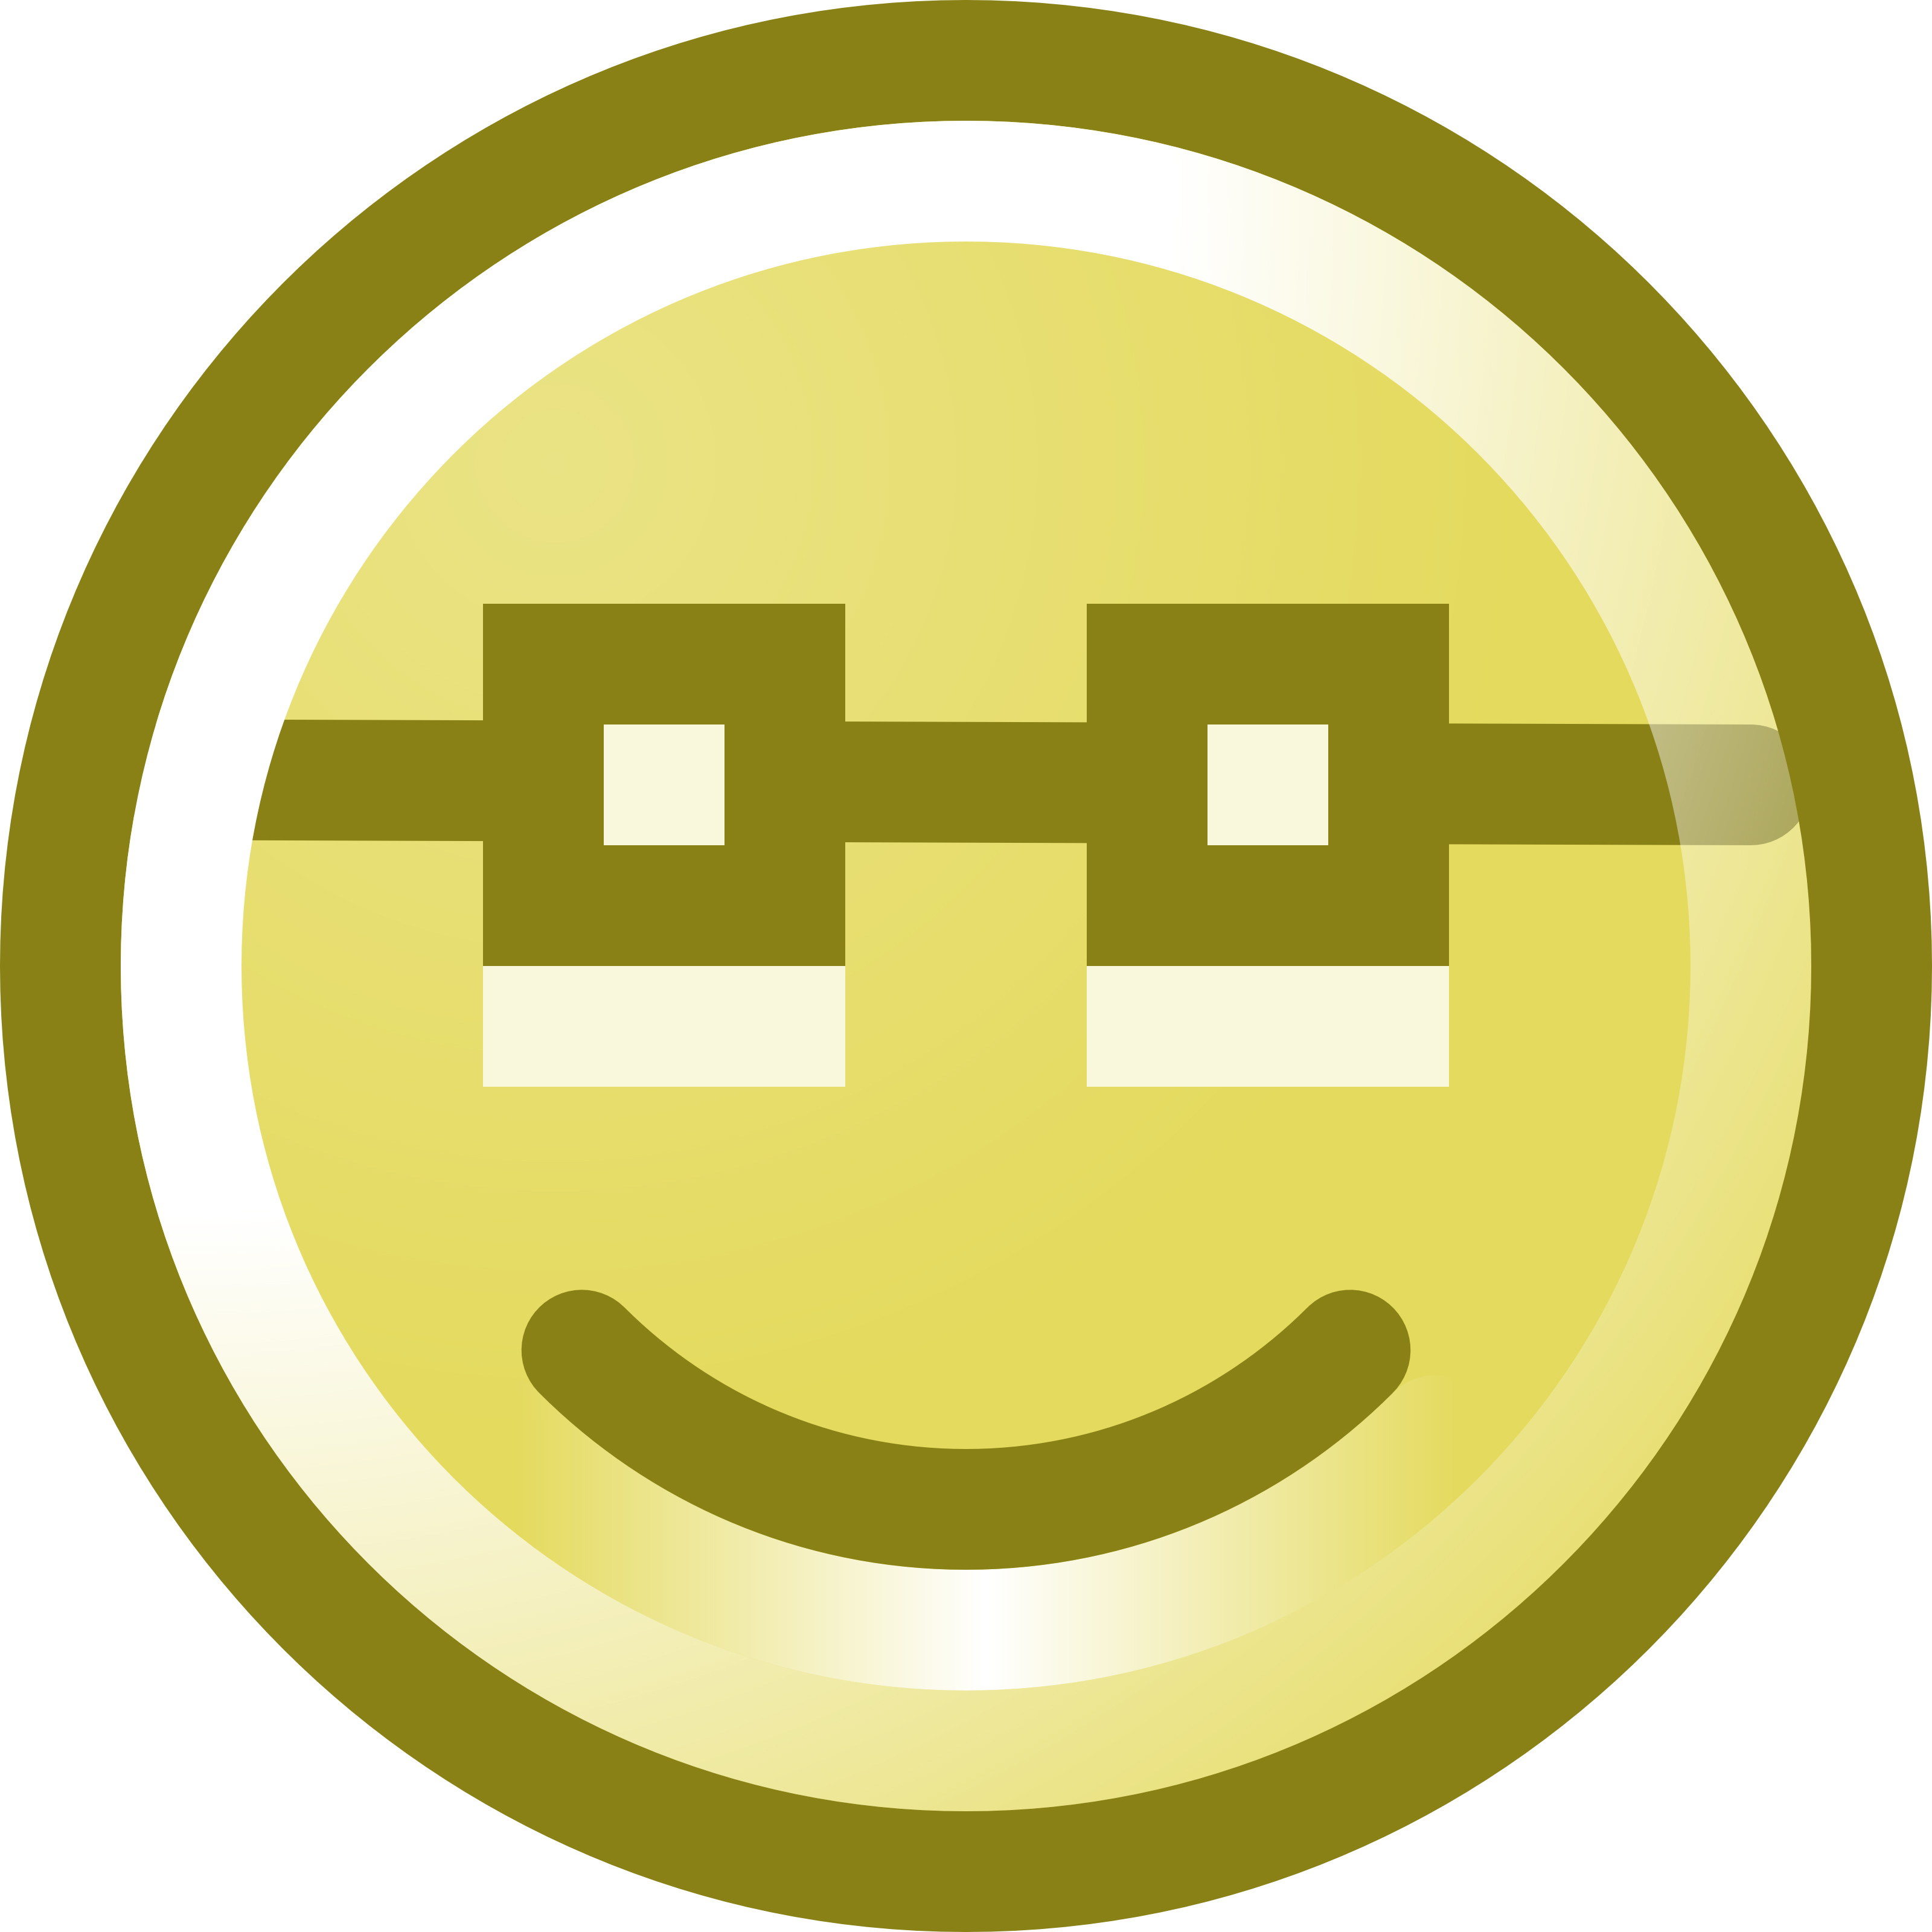 Free Smiley Face Wearing Glasses Clip Art Illustration by Picsburg